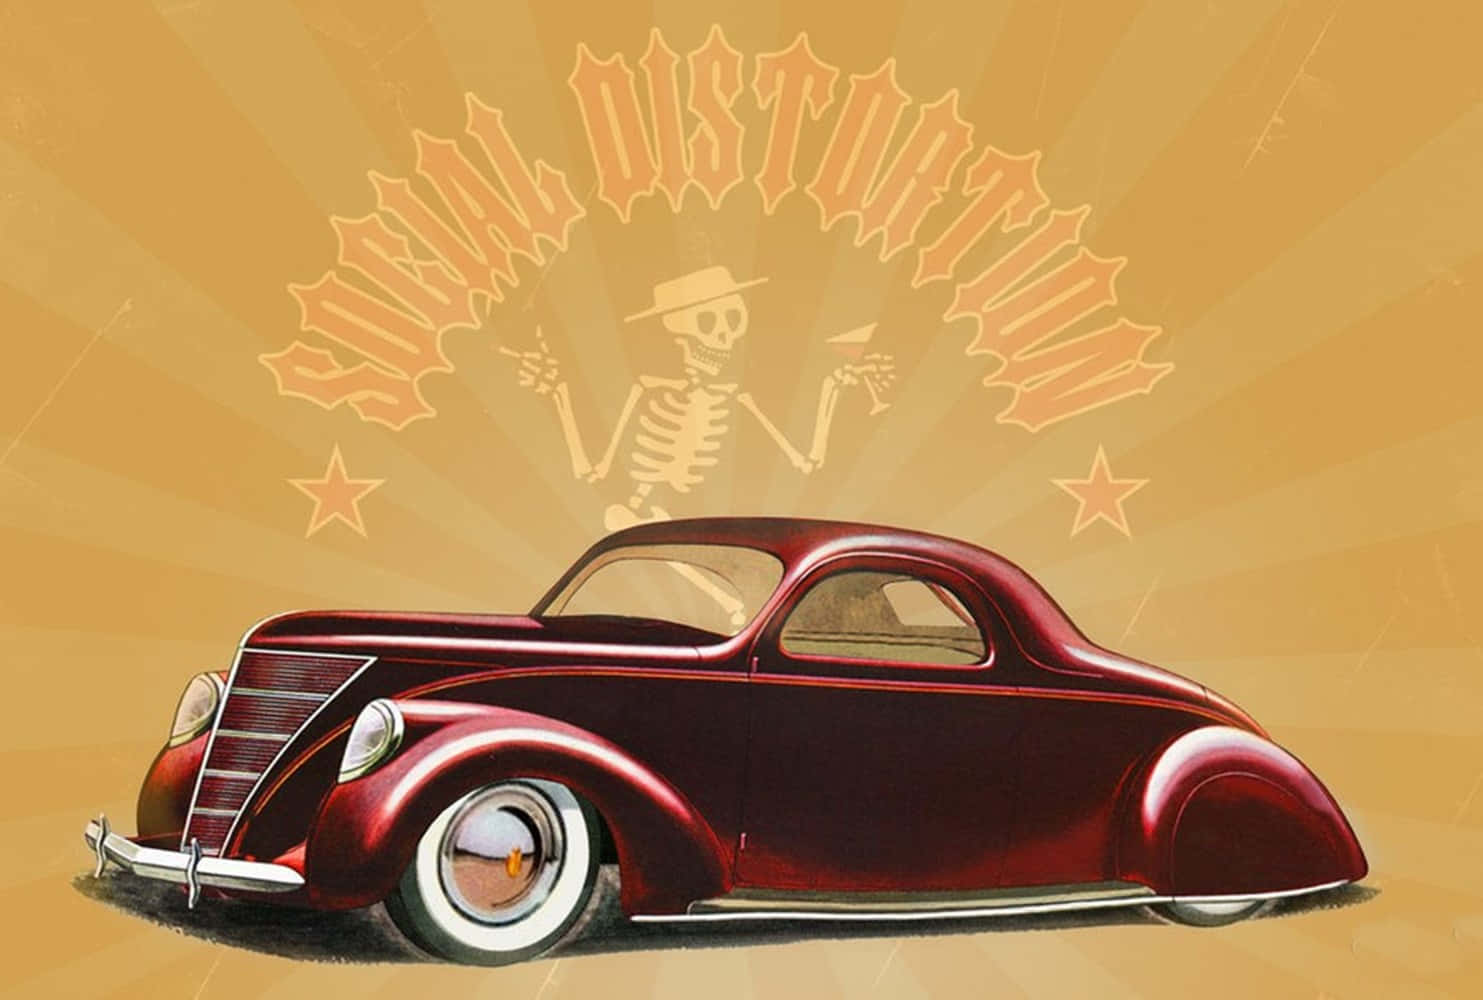 Social Distortion With Photo Of Retro Car Wallpaper